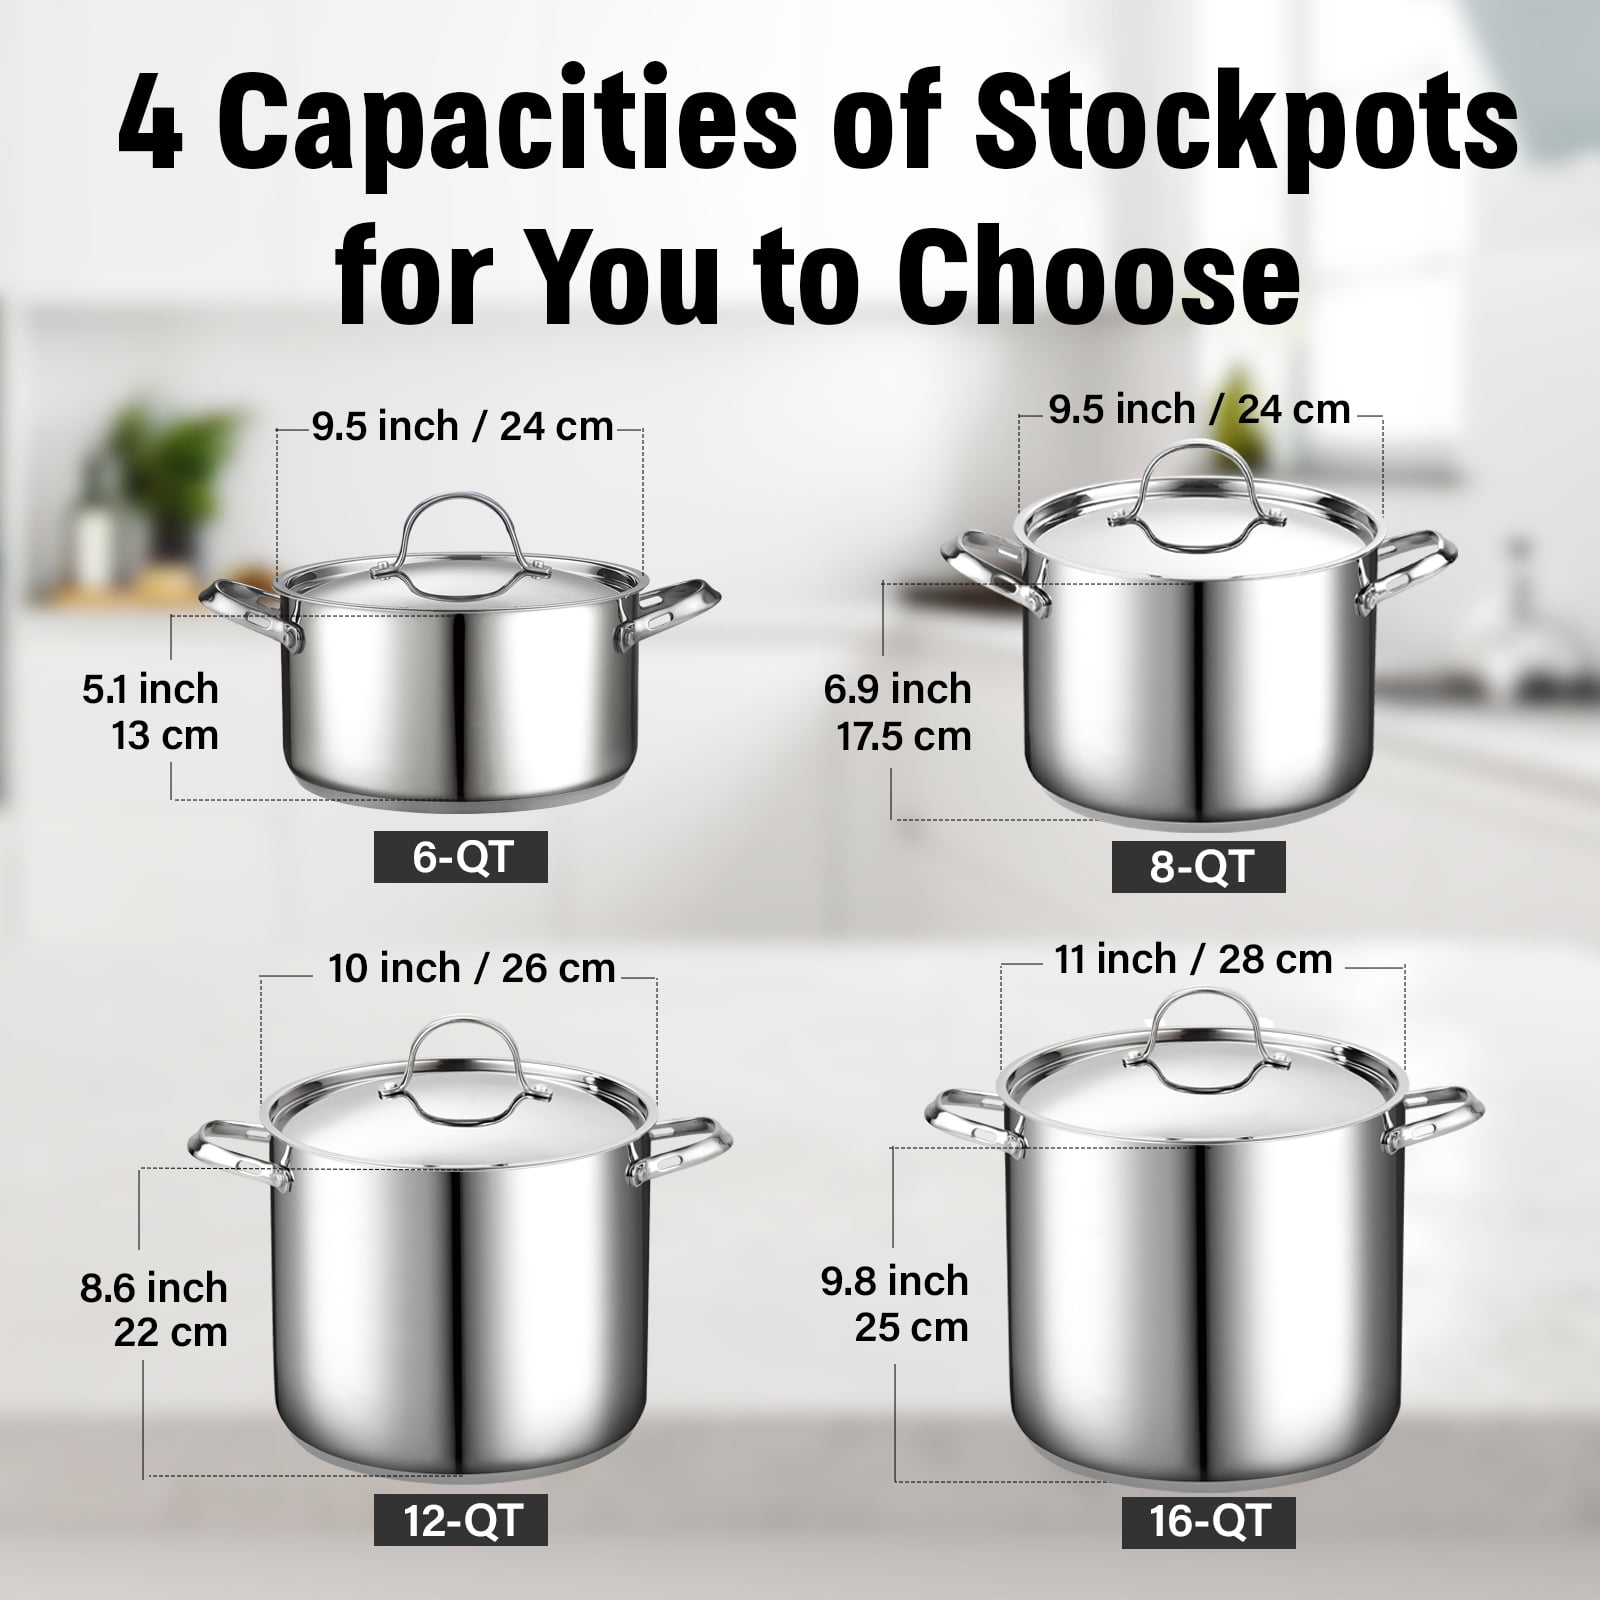 Stockpot 8 quart stock pot stainless stock pot with lid stainless